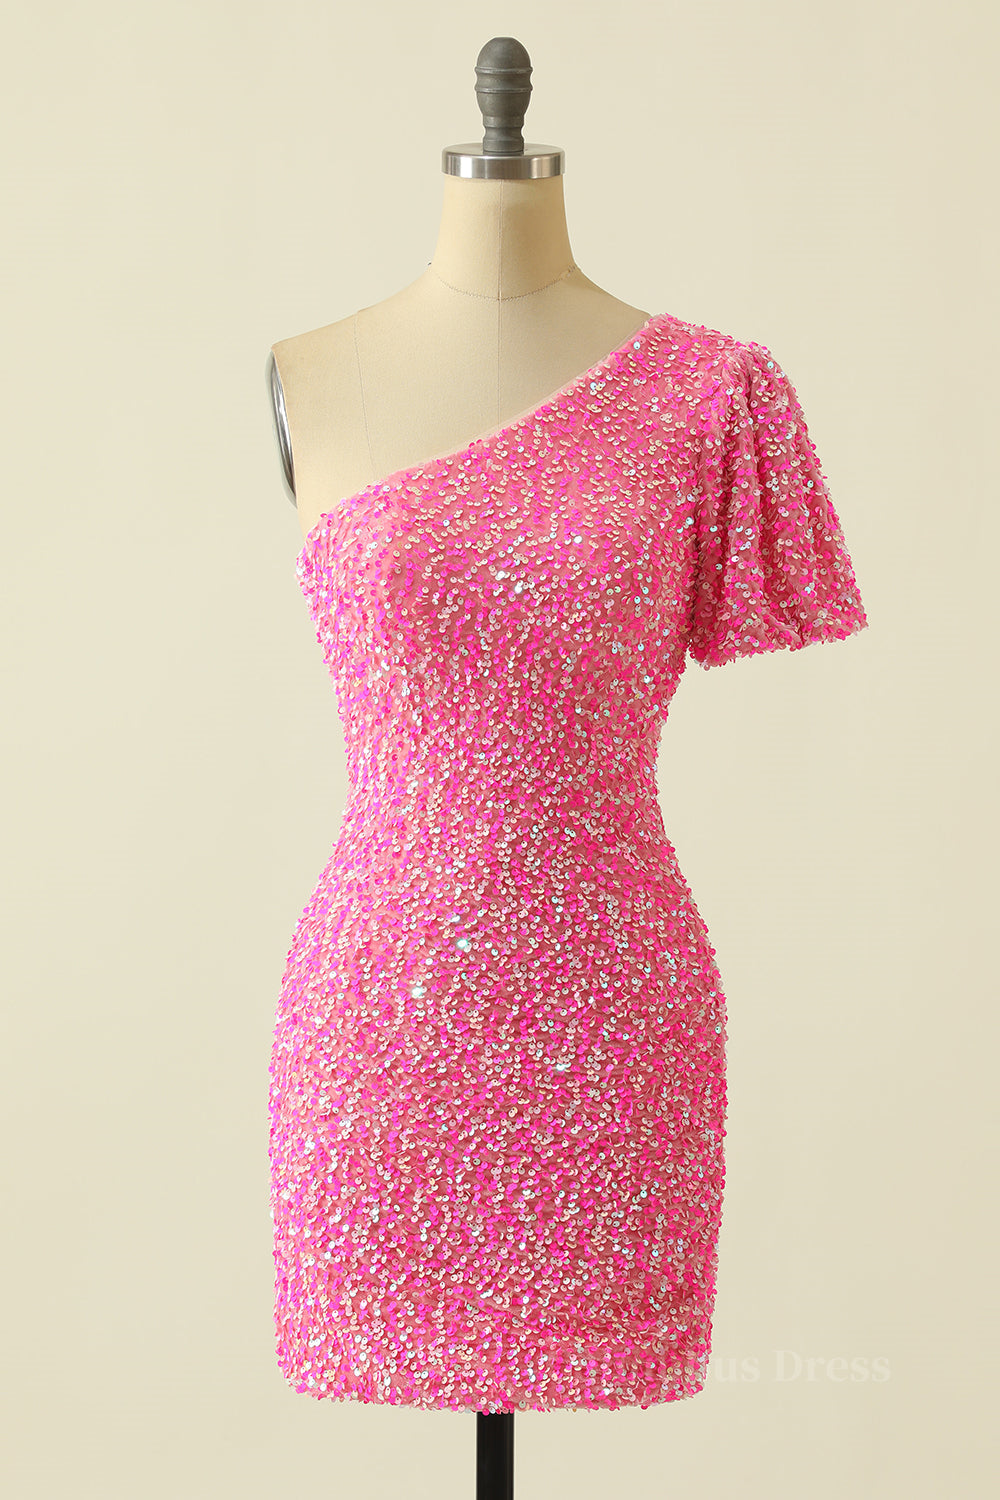 Party Dress Long, Pink Sequin Tight One Shoulder Short Sleeve Mini Dress